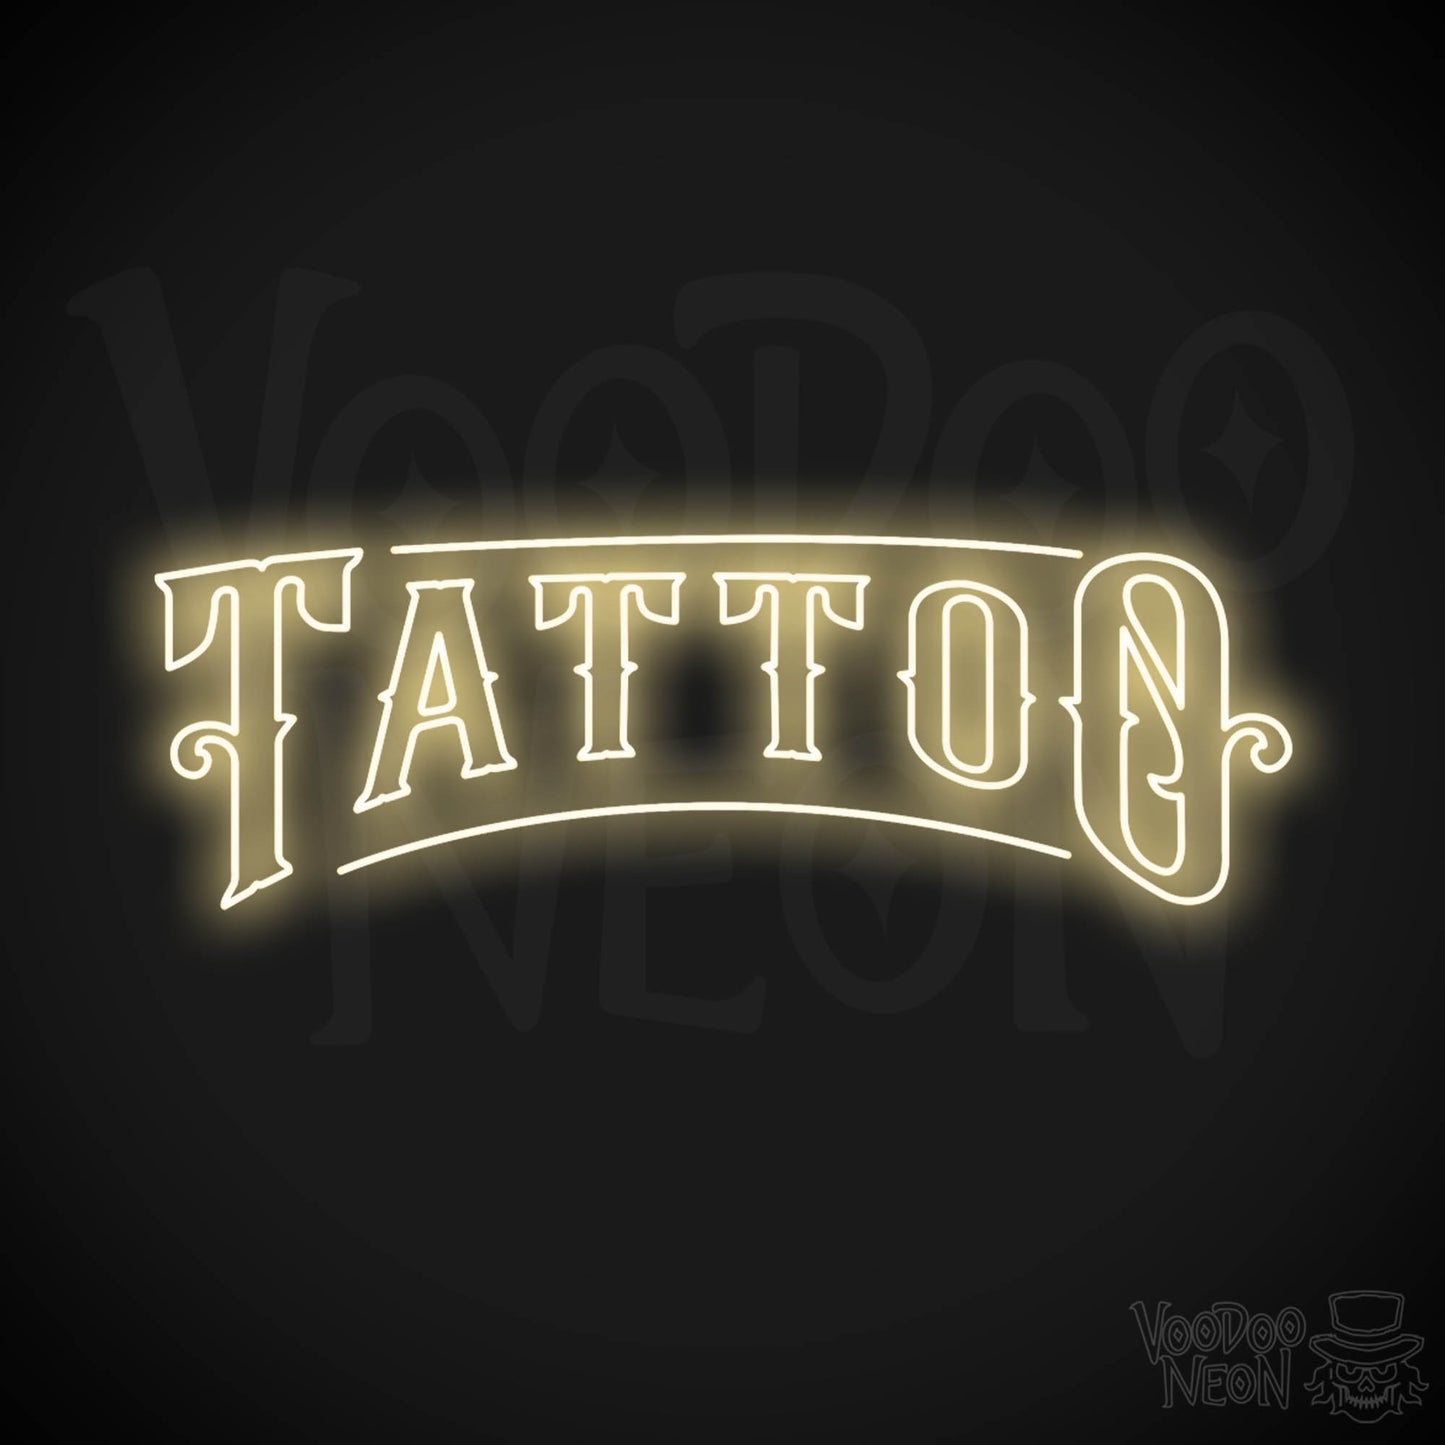 Tattoo Parlor LED Neon - Warm White